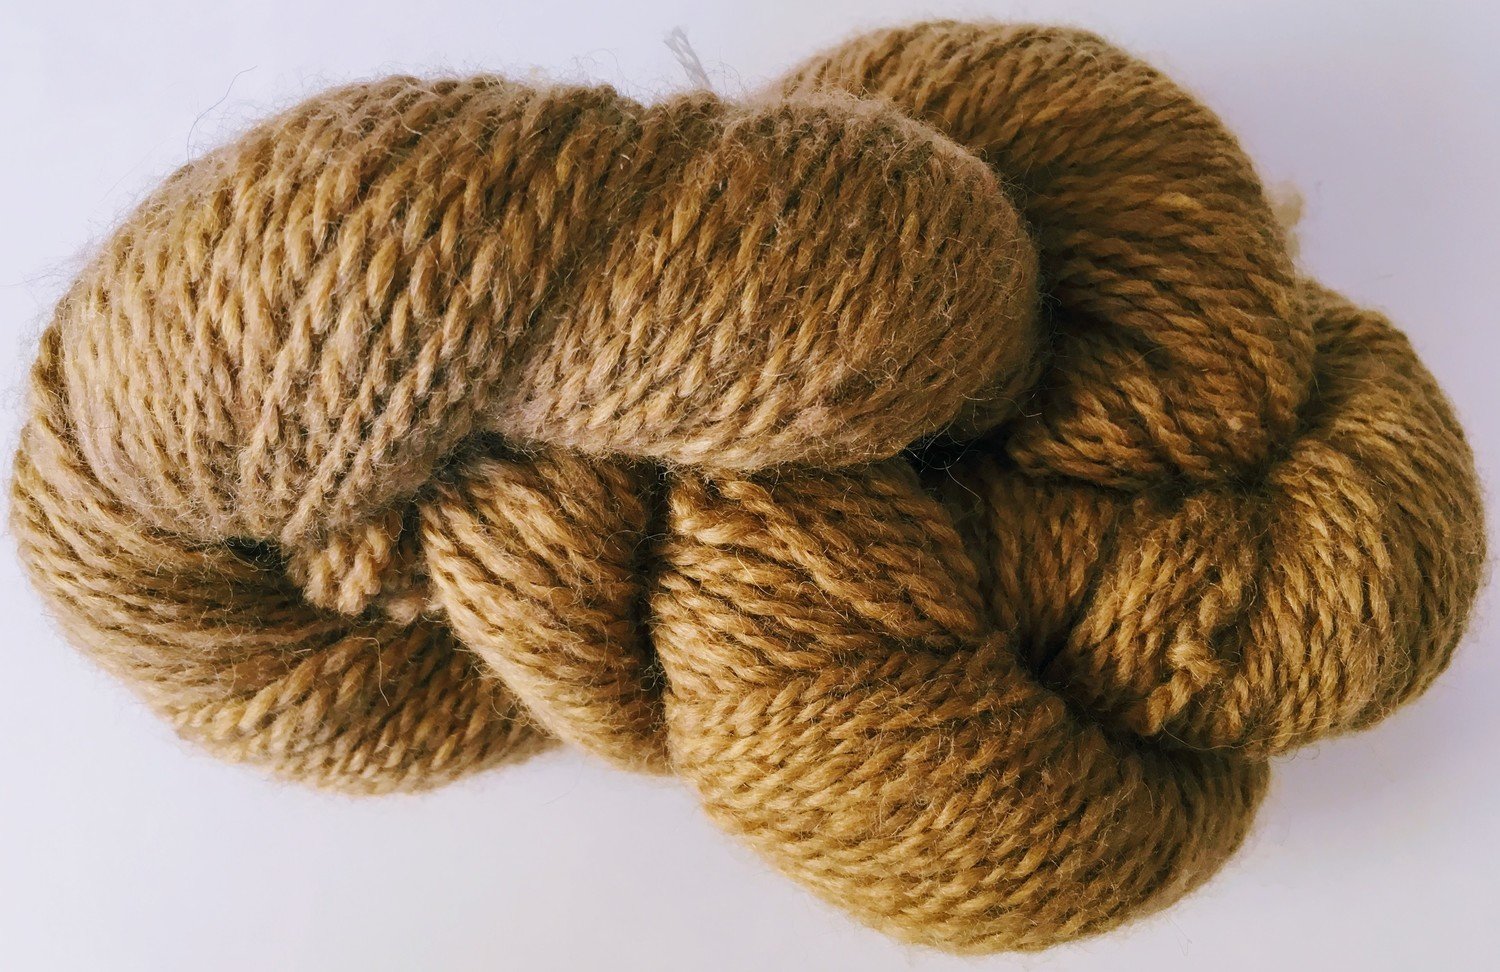 Breezy Hill Cottage-Milled, Hand-Dyed Yarn - Mocha